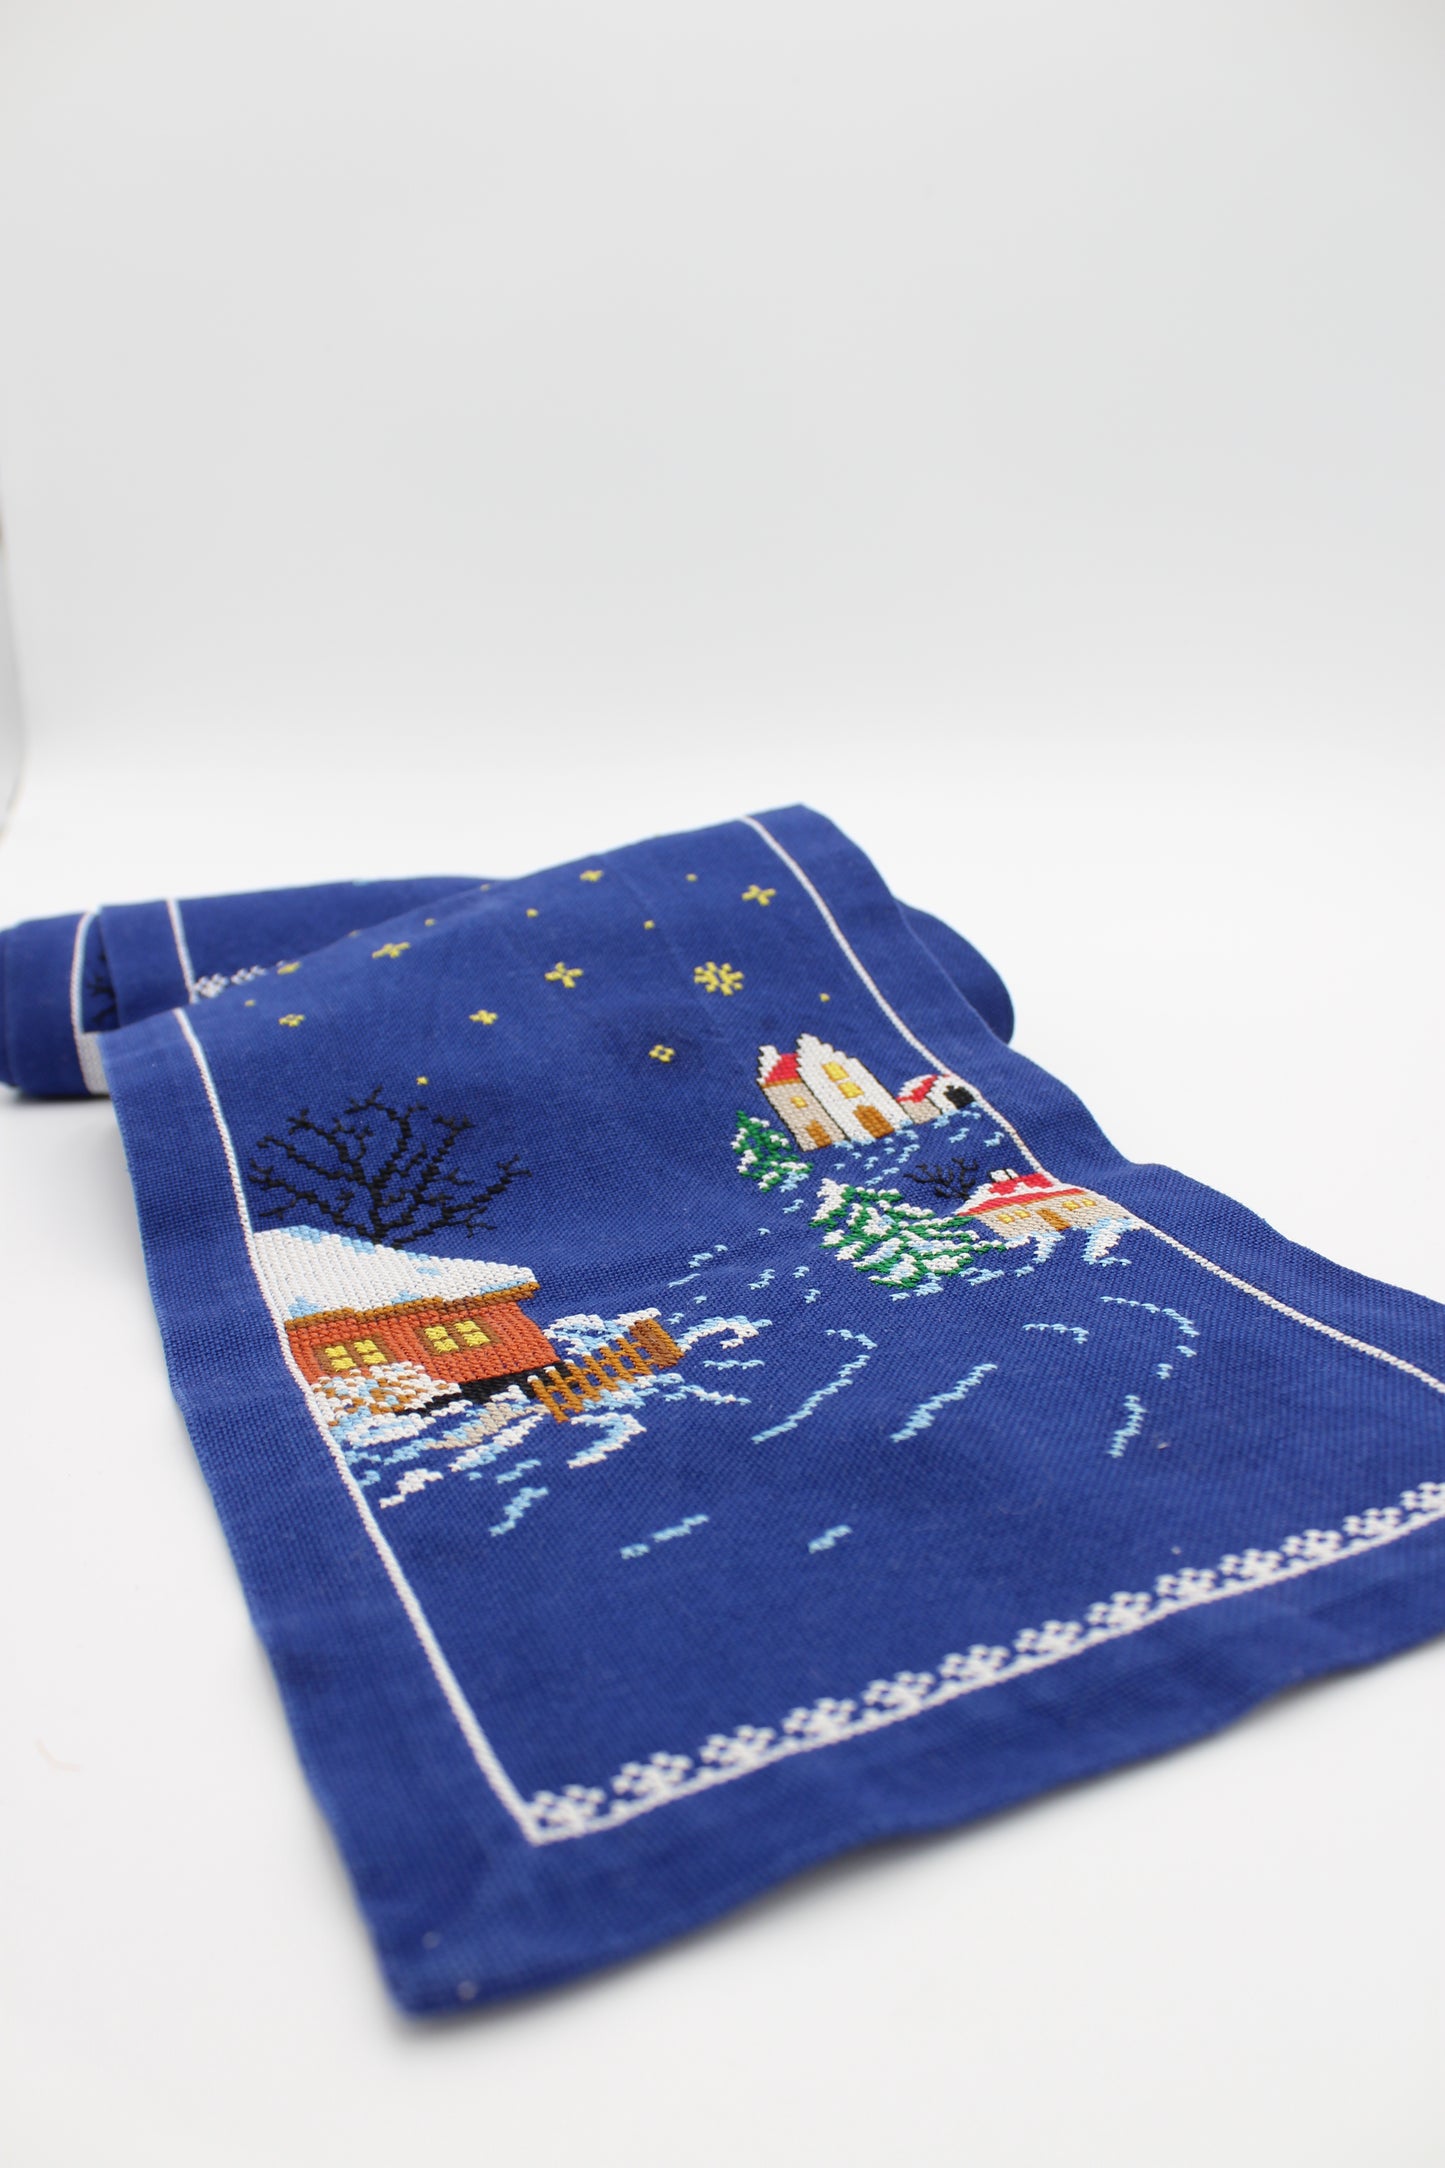 Embroidered Christmas table runners, 2 pcs.